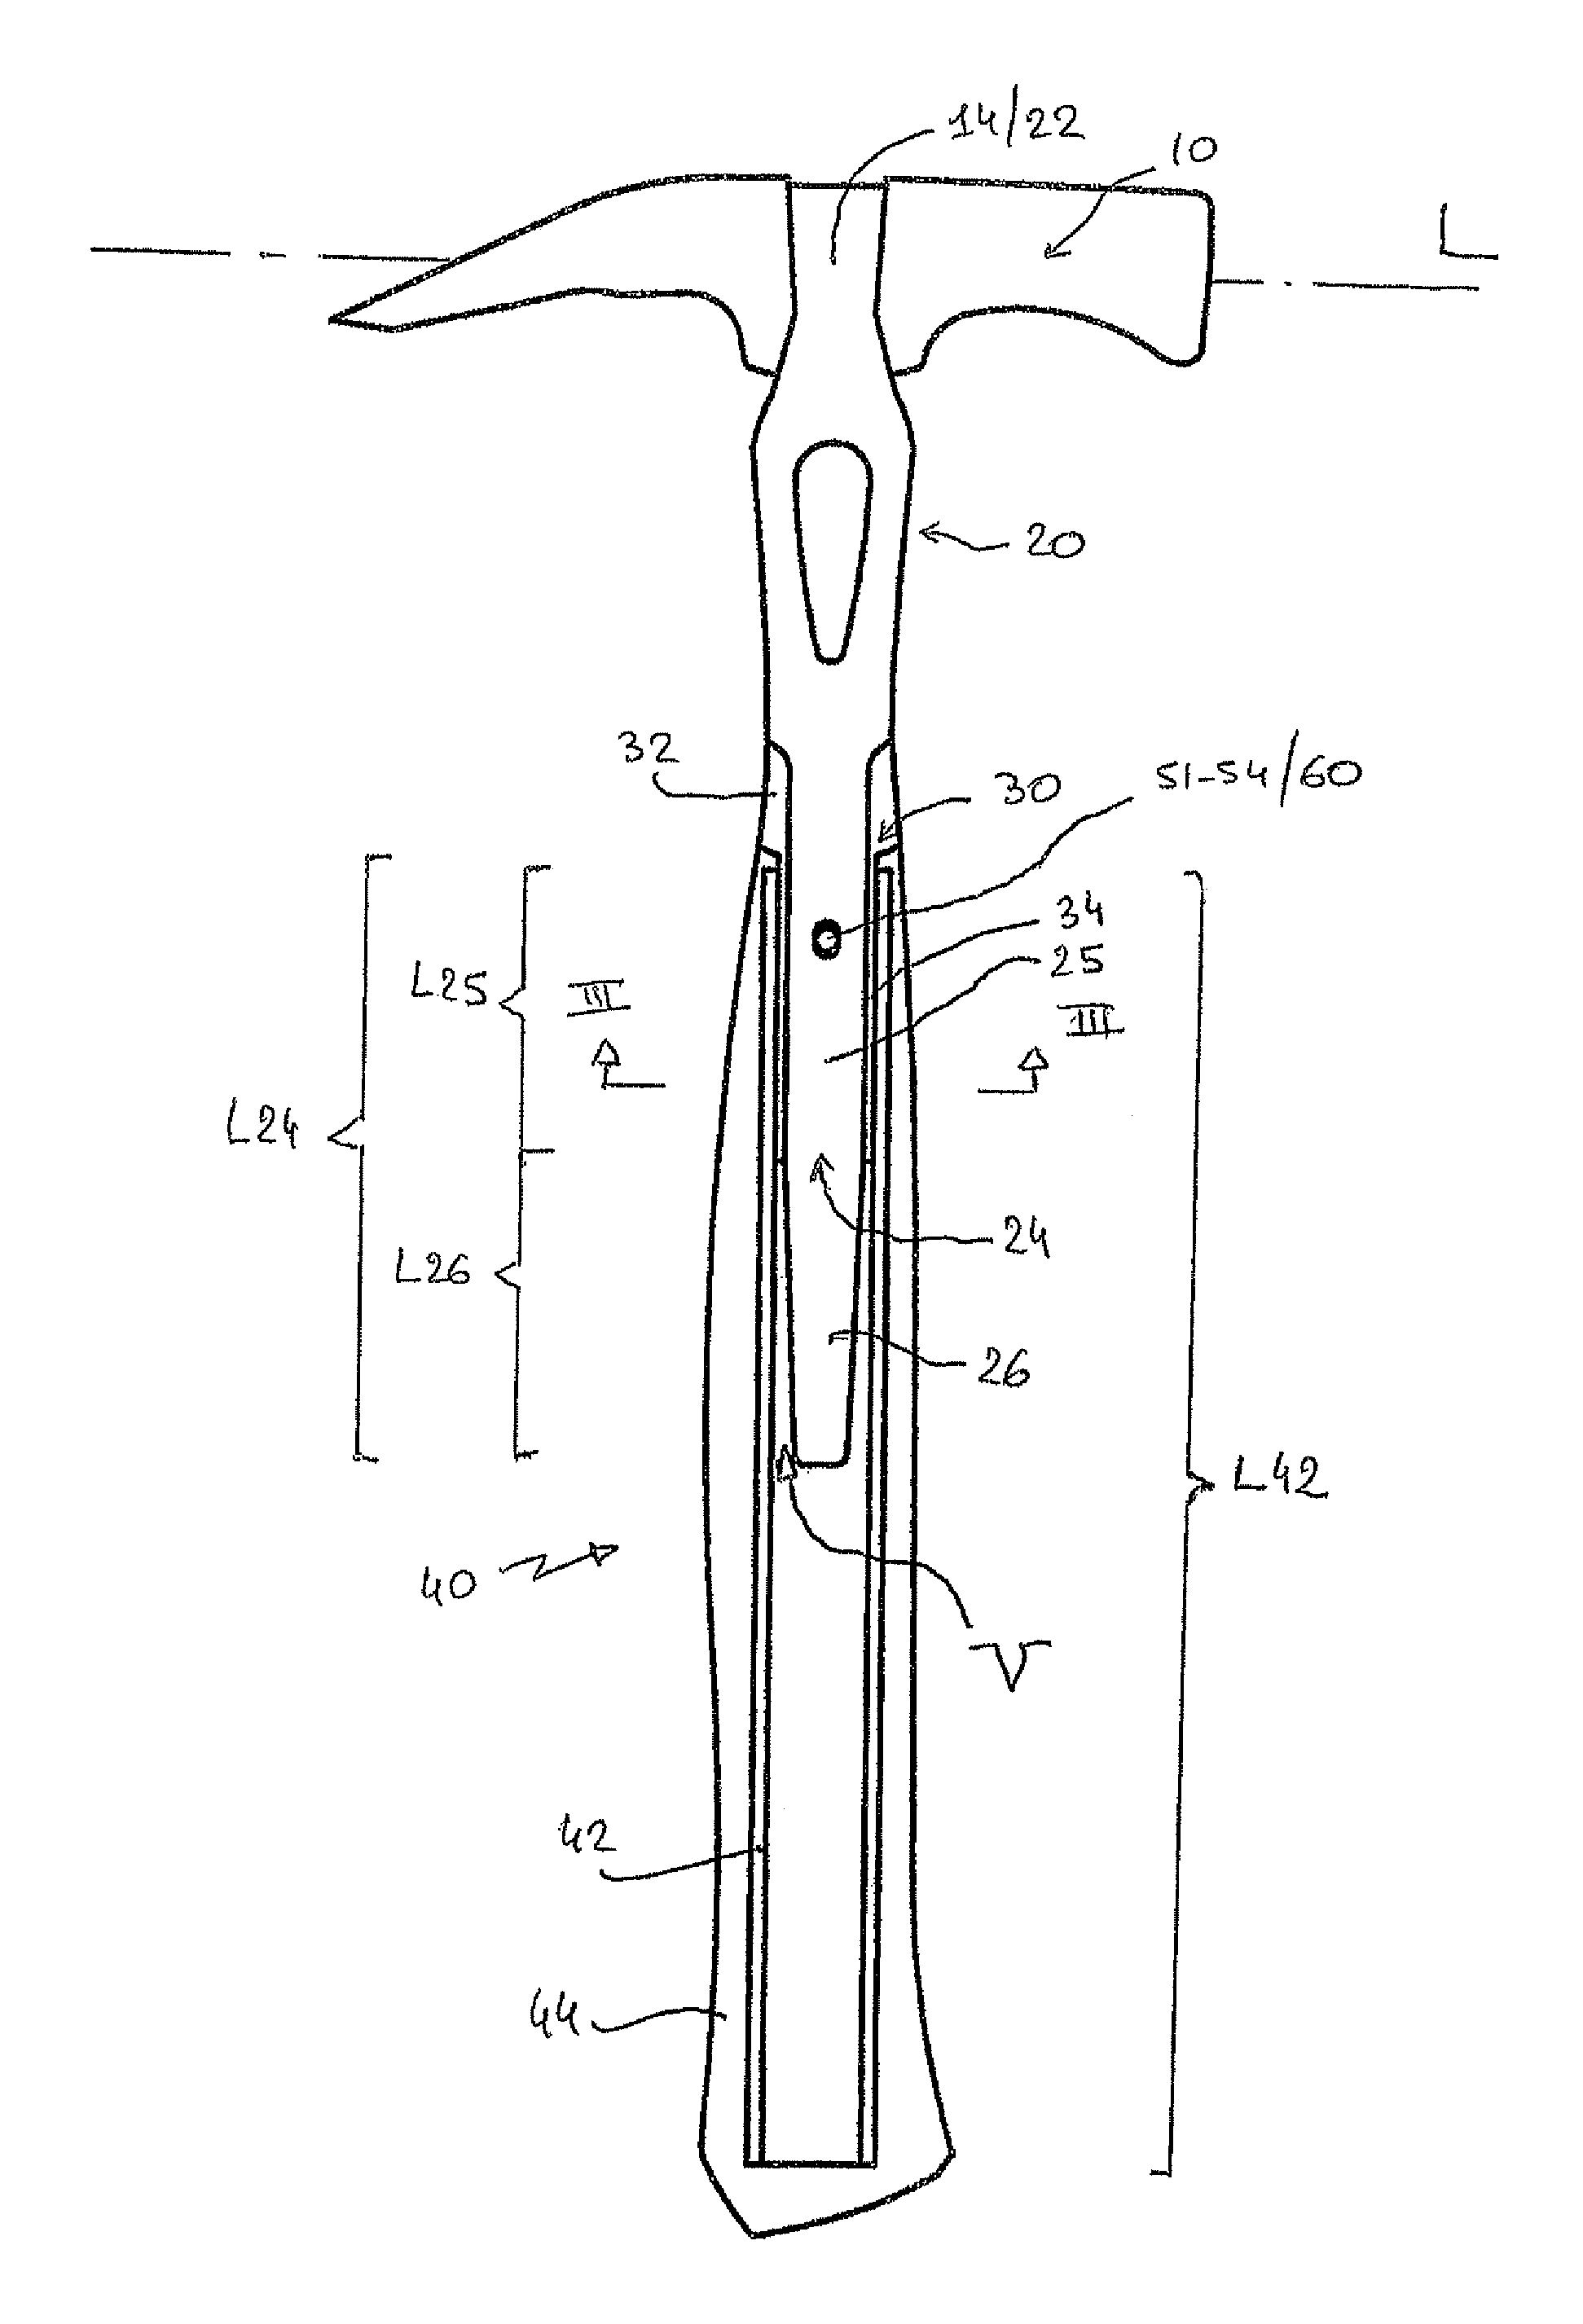 Hand-operated striking tool enabling vibrations to be reduced, and method for manufacturing